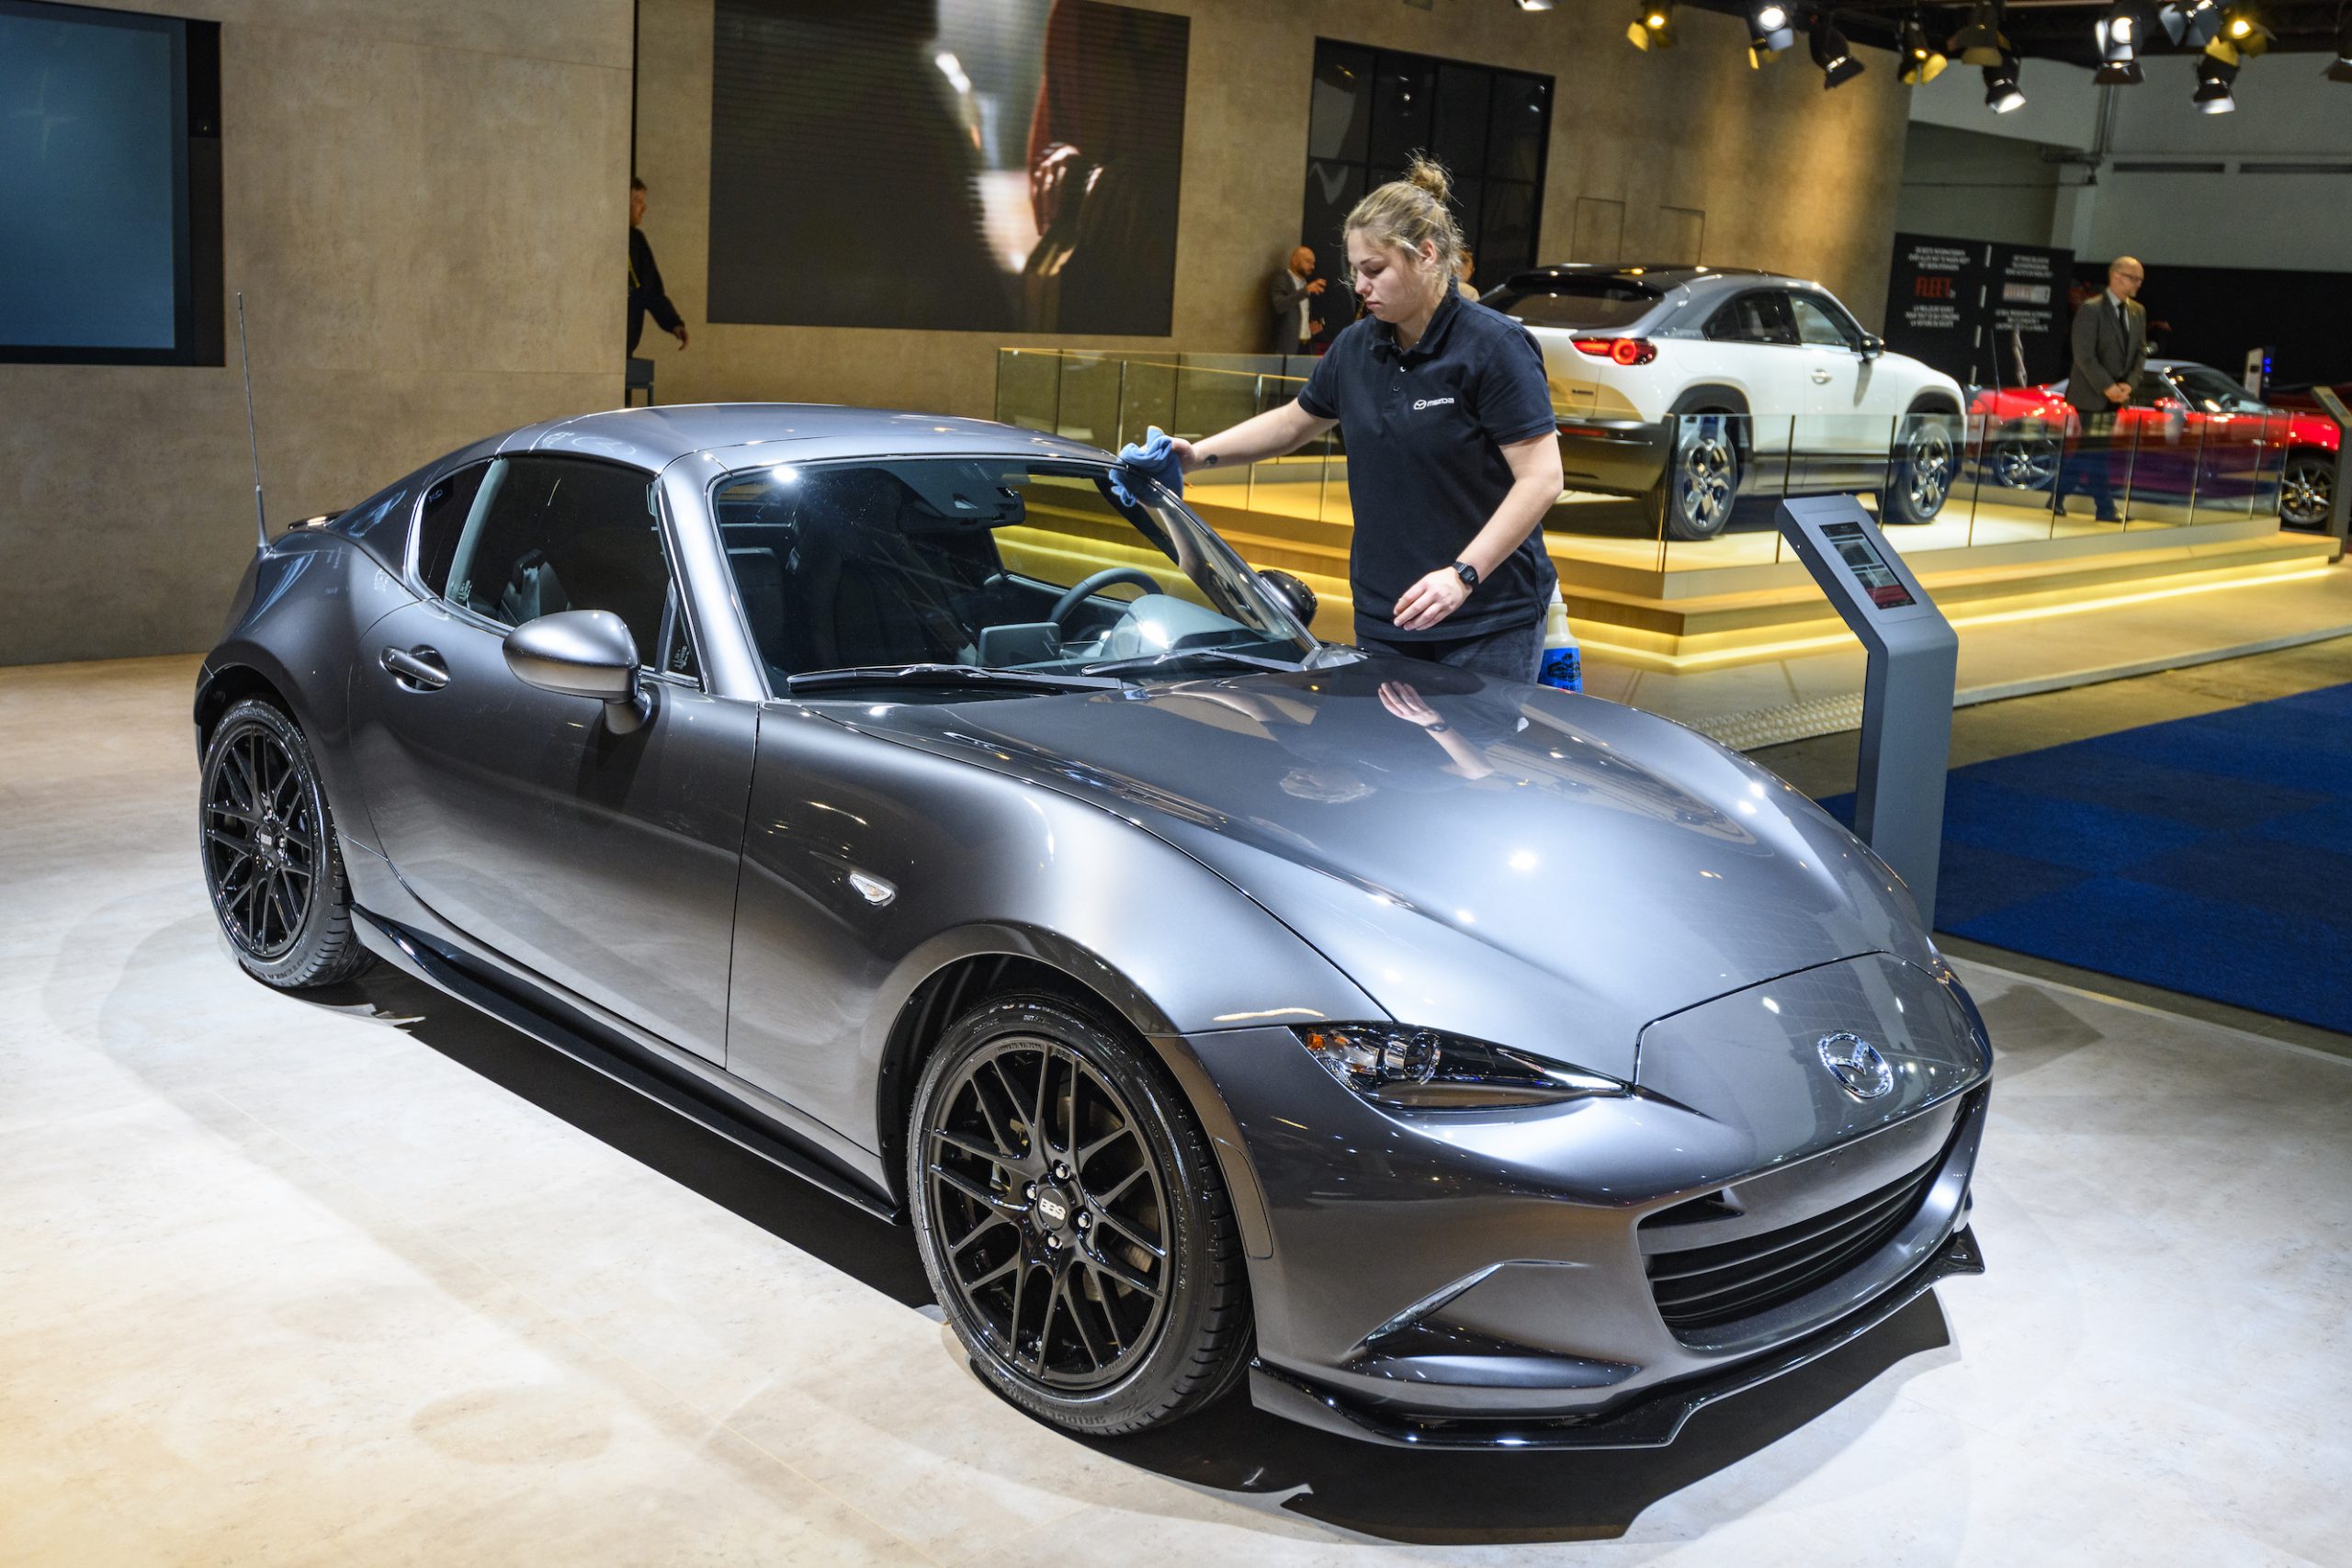 Mazda MX-5 RF compact sports car on display at Brussels Expo